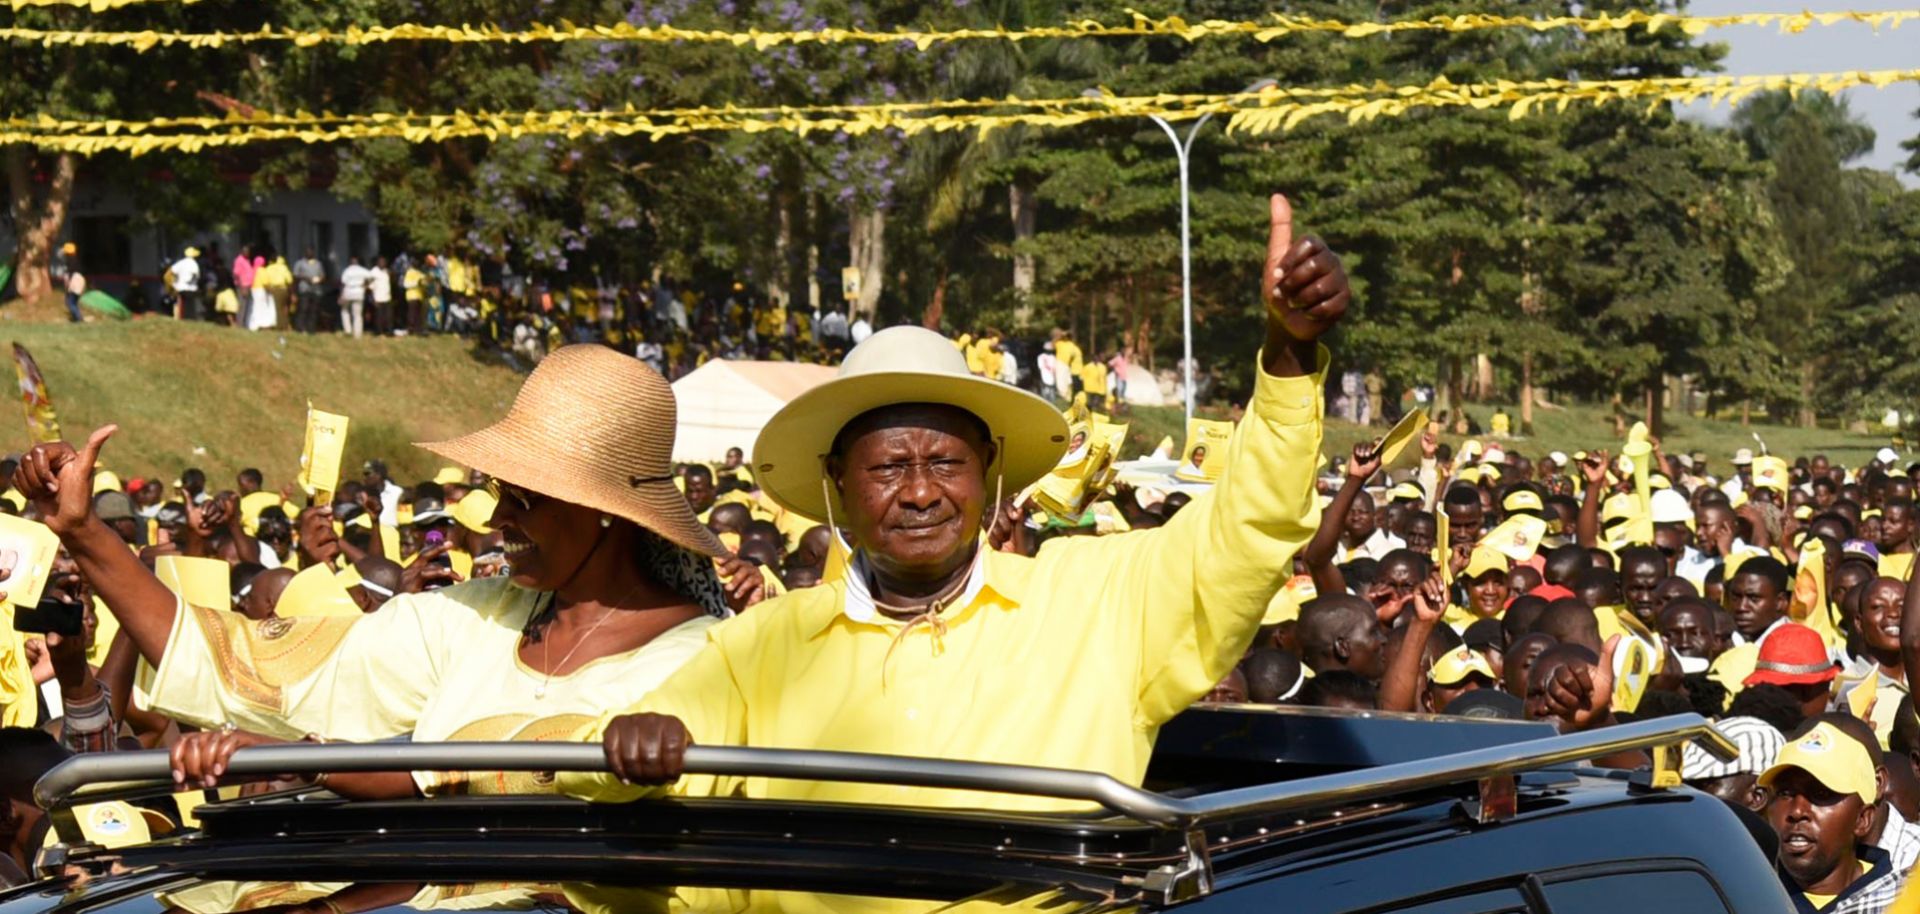 Ugandan President Yoweri Museveni, riding with his wife to a campaign rally Feb. 16, has used his government's control over the nation's resources to remain in power for decades.